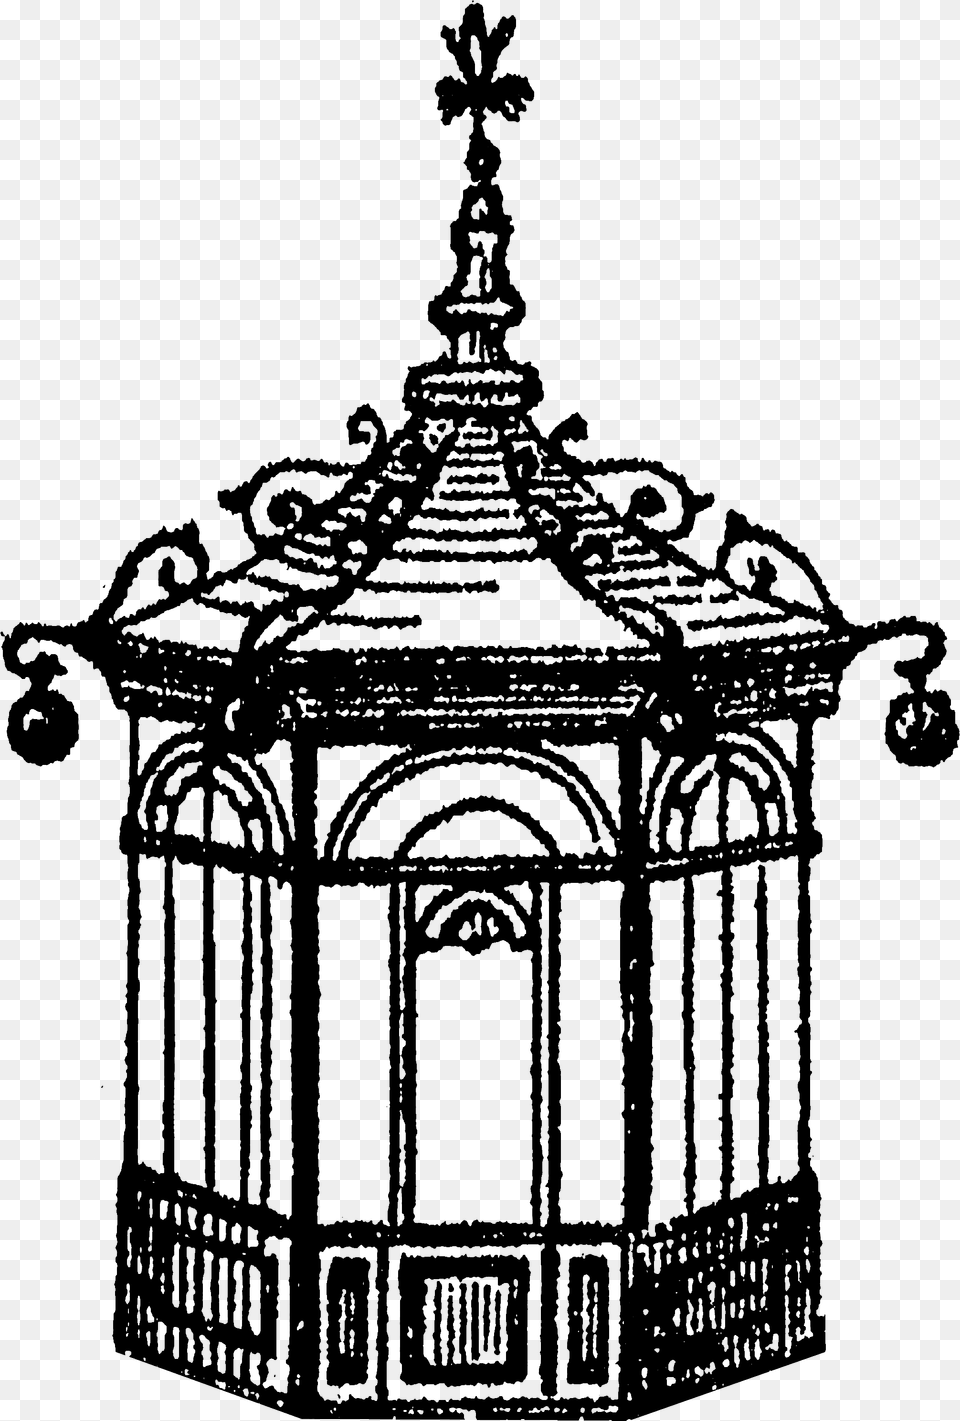 Go To Black And White Gazebo Clipart Free Png